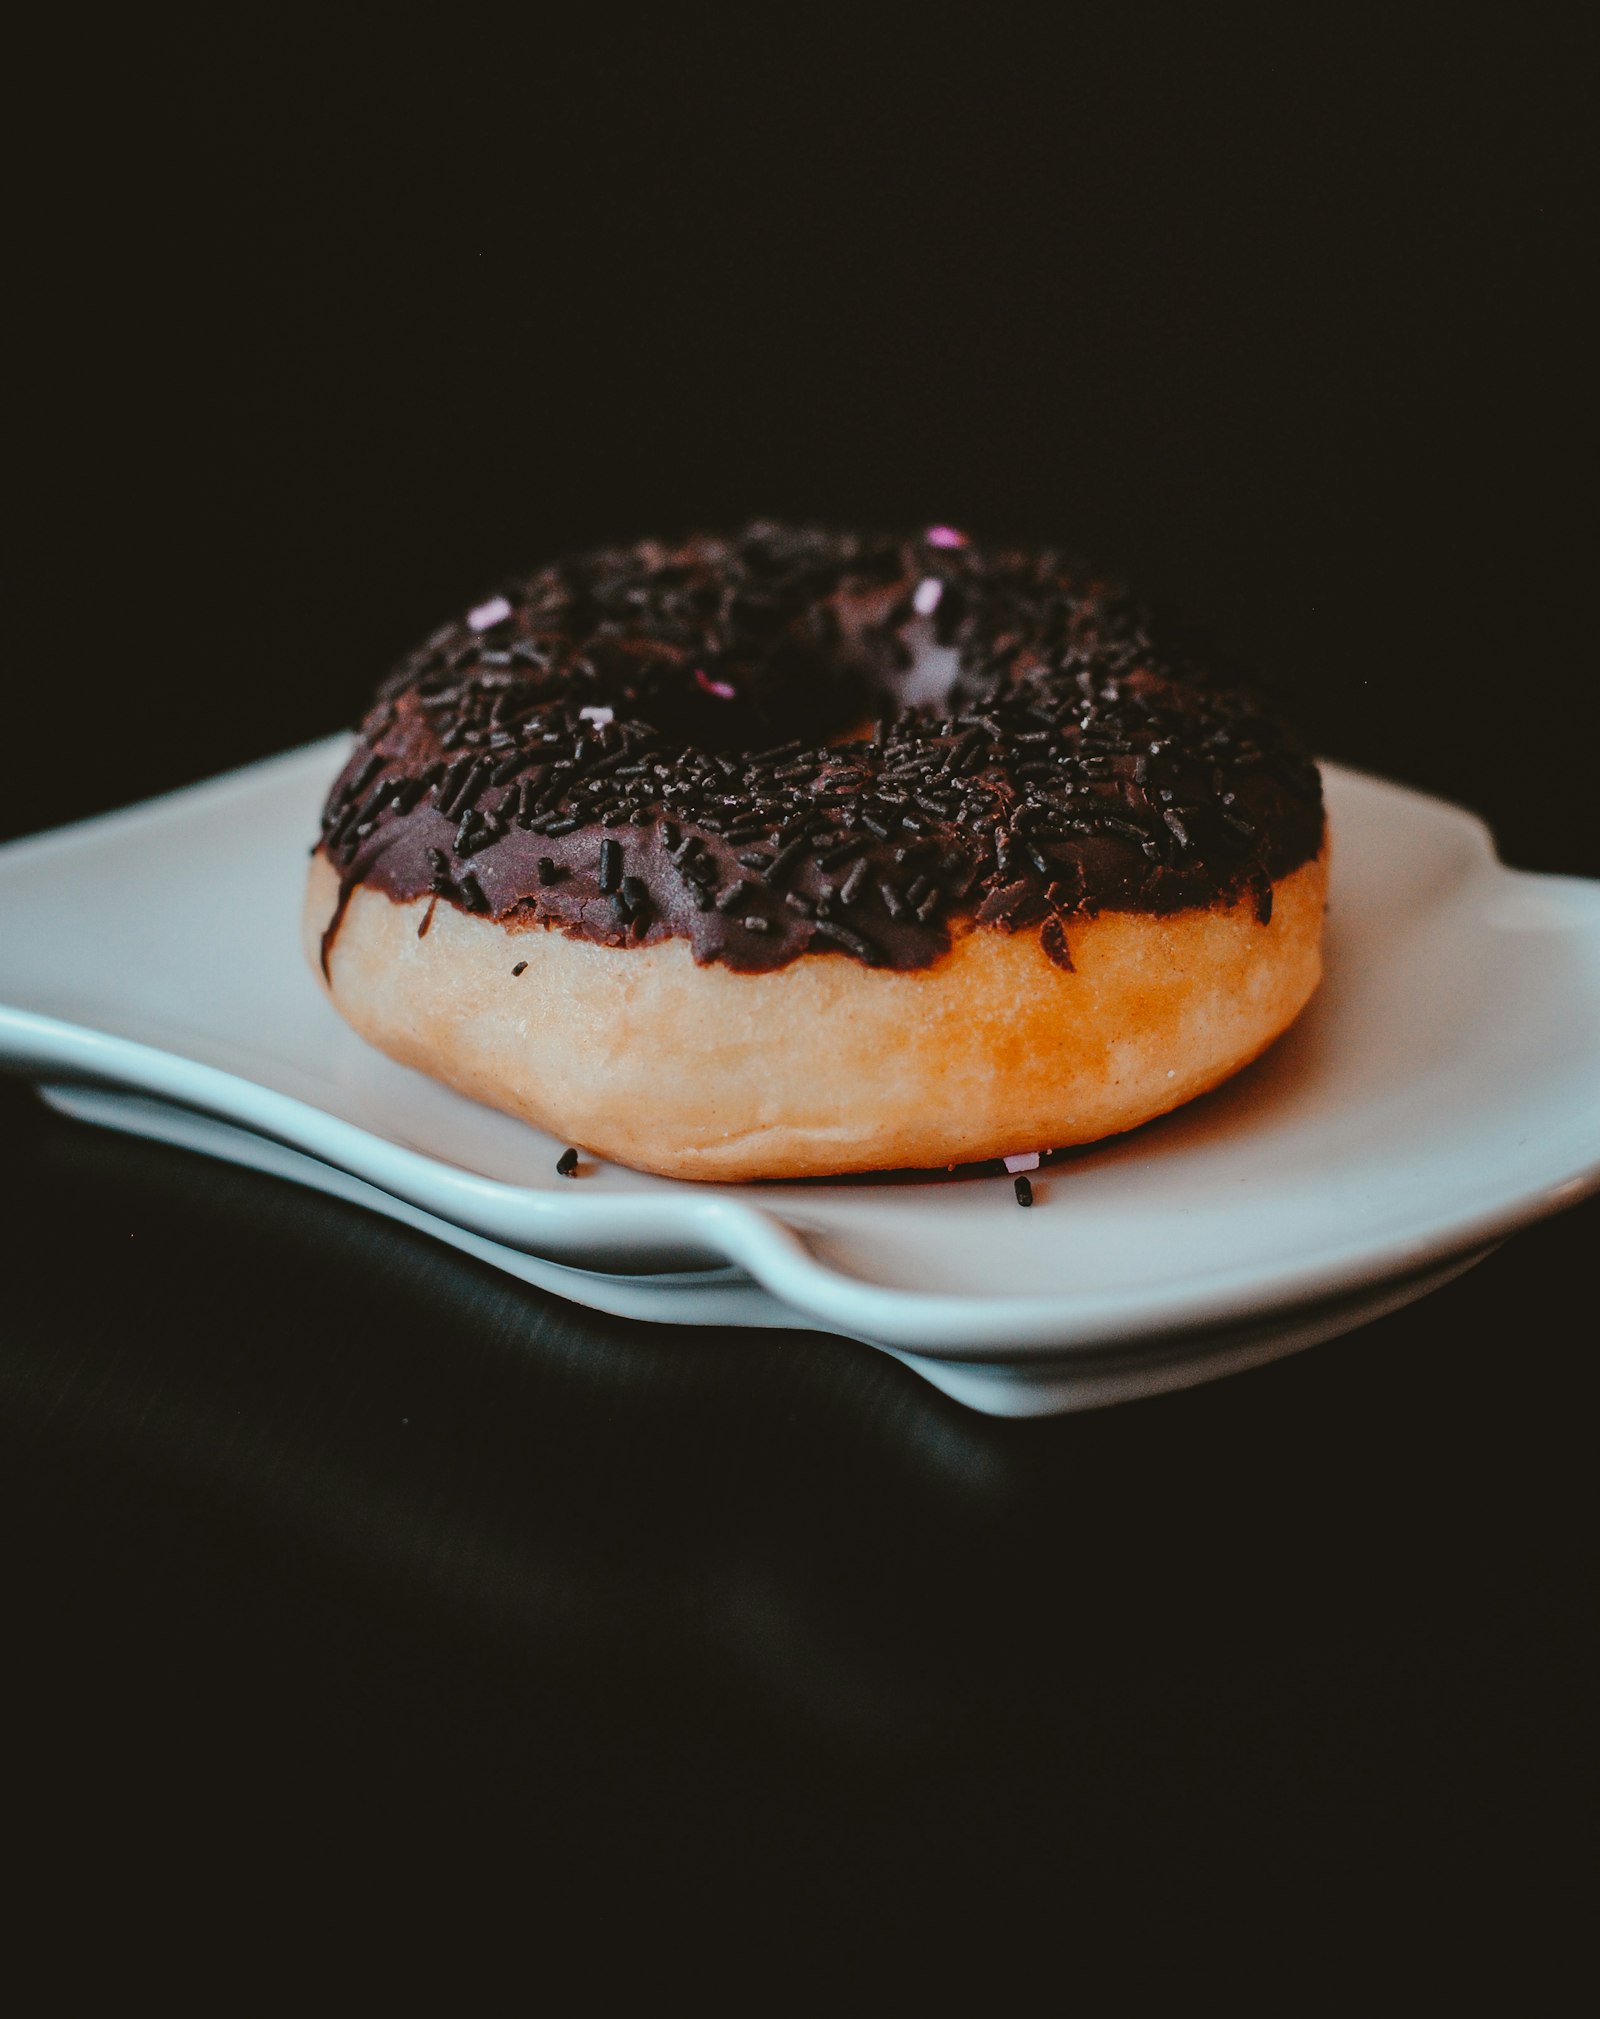 Nikon AF Nikkor 50mm F1.8D sample photo. Doughnut with chocolate toppings photography